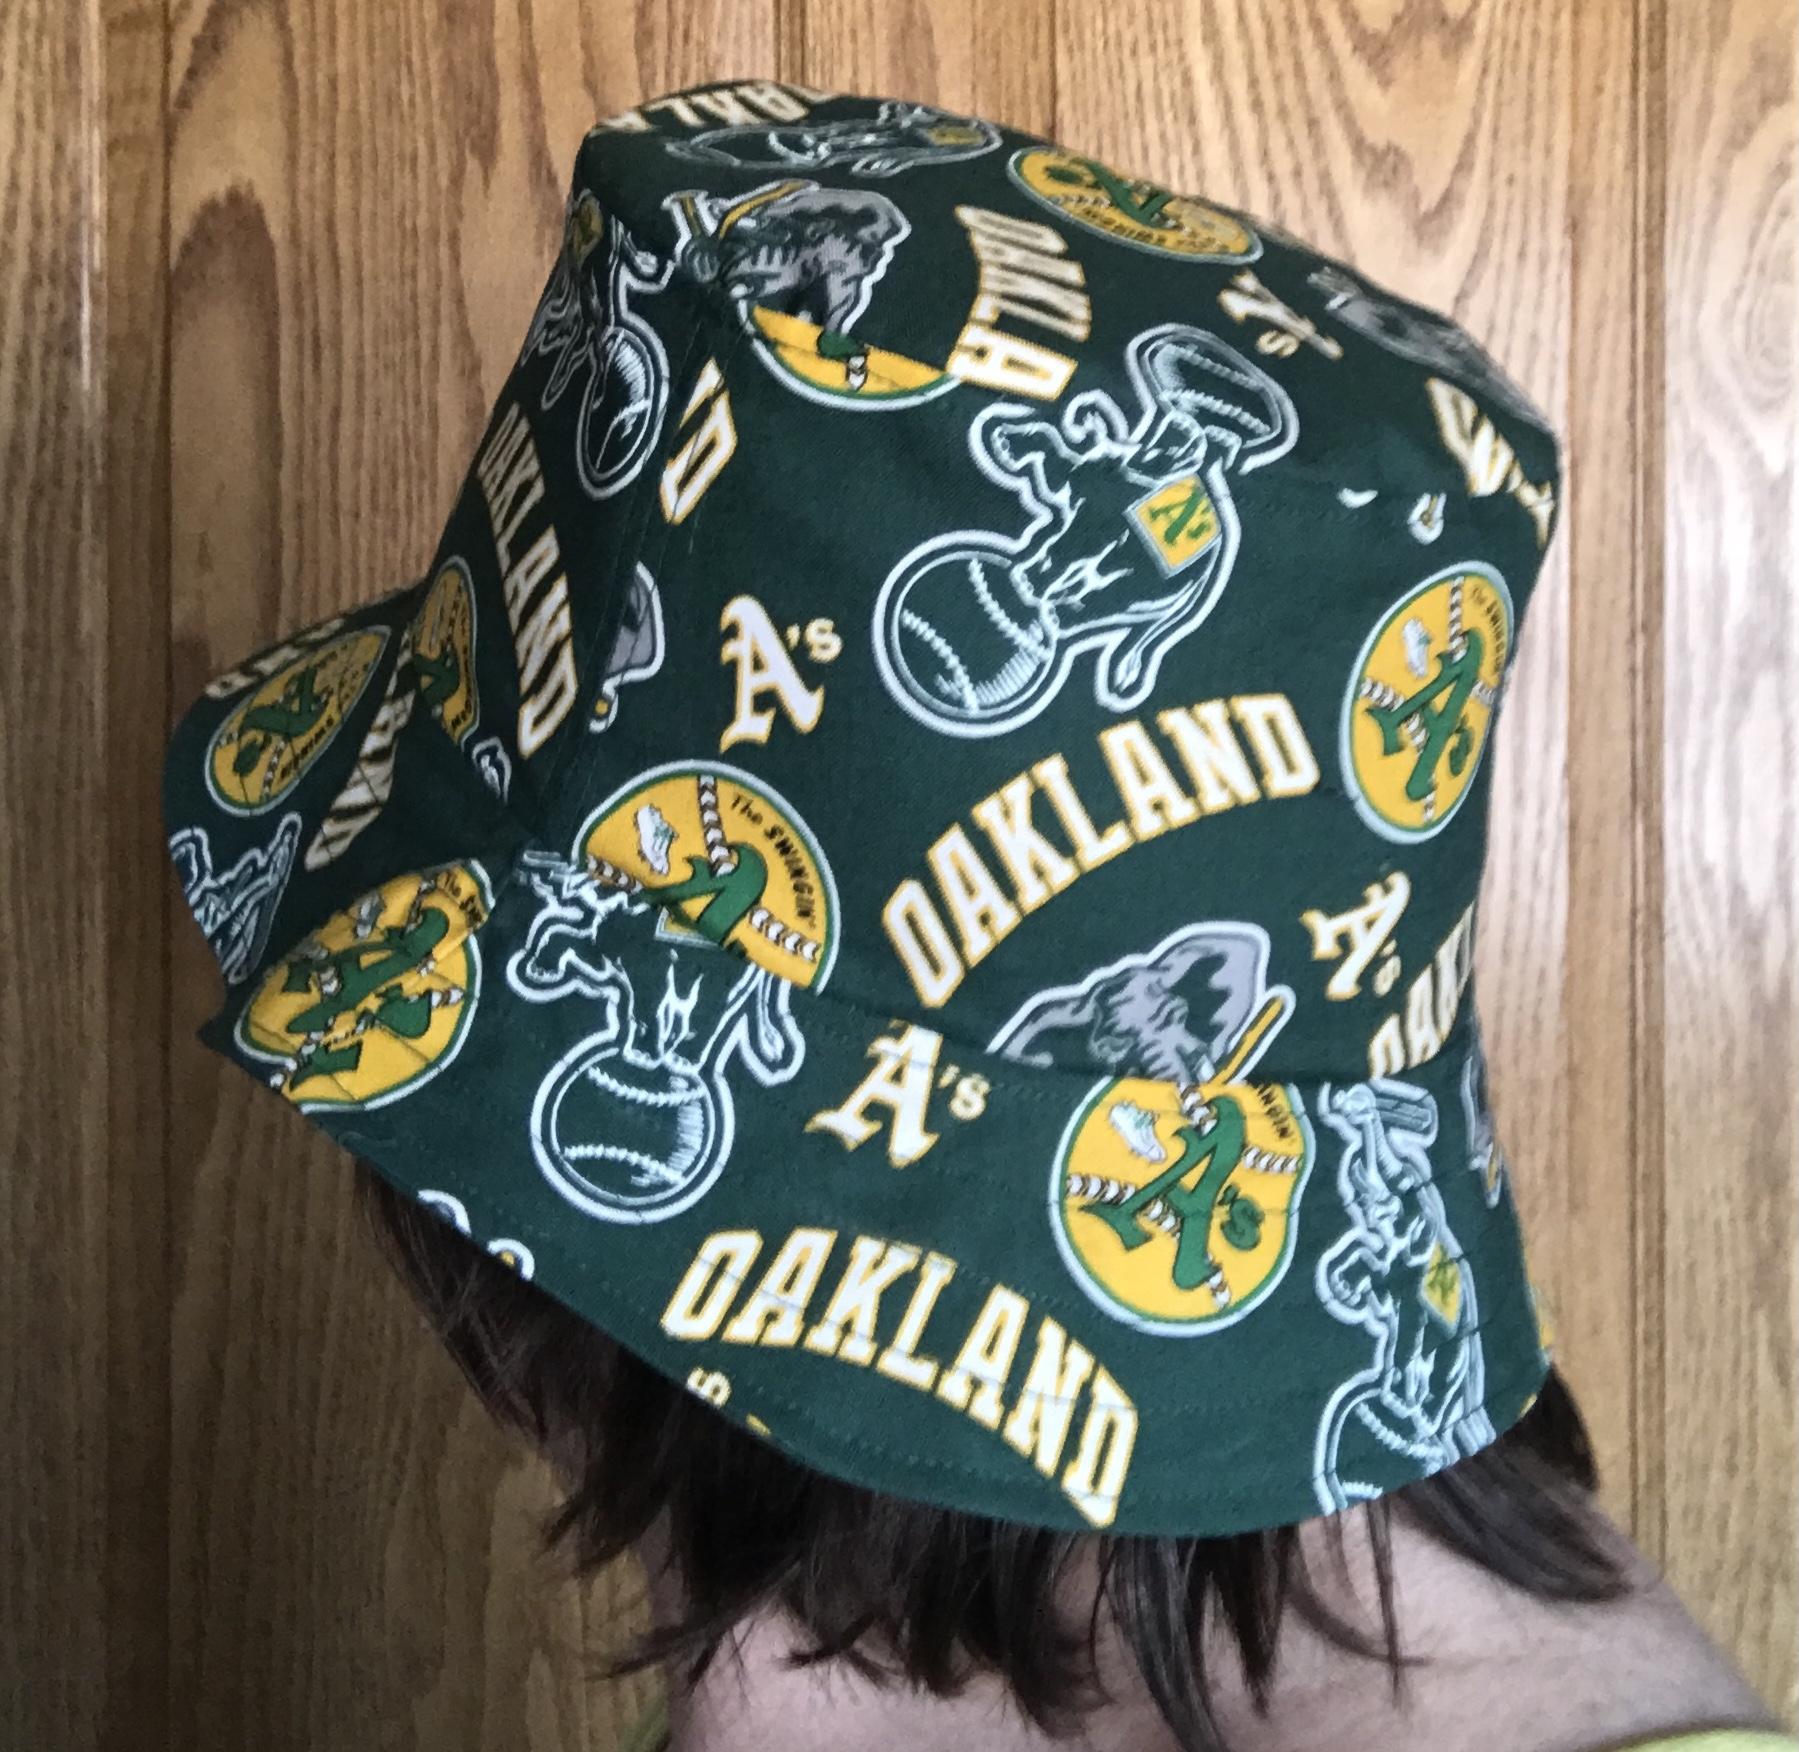 rsible Oakland A's Swingin' A's bucket hat, side view on person's head, handmade